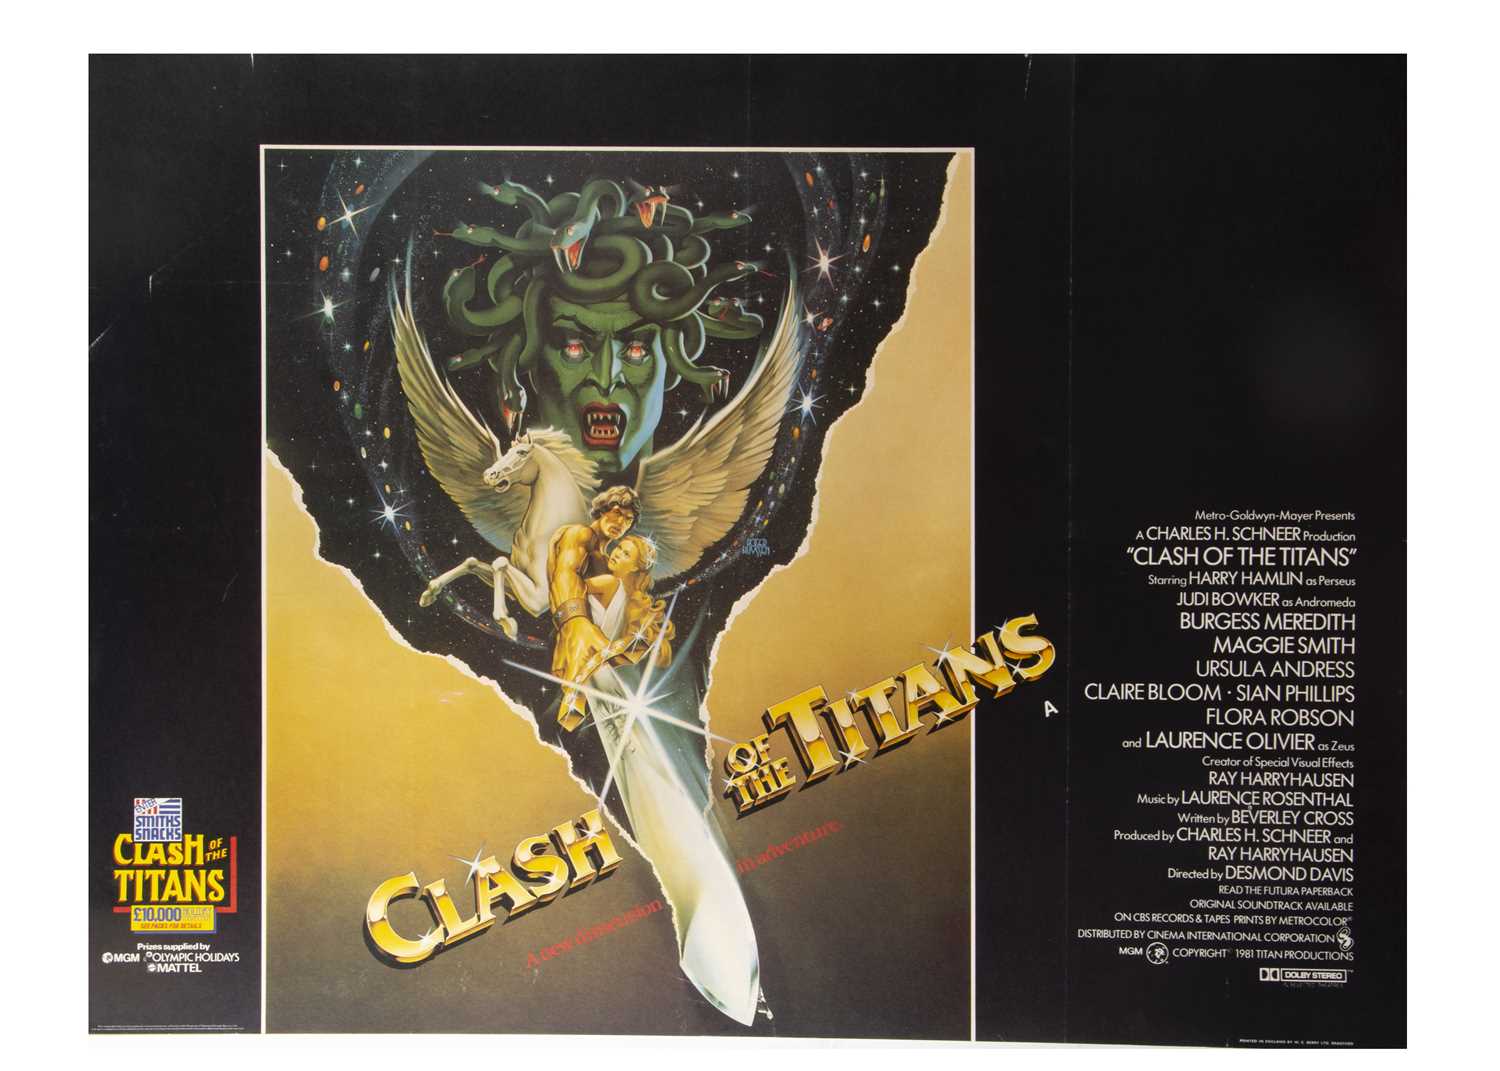 Clash of the Titans / Outland / Victor Victoria Posters, - Image 5 of 6